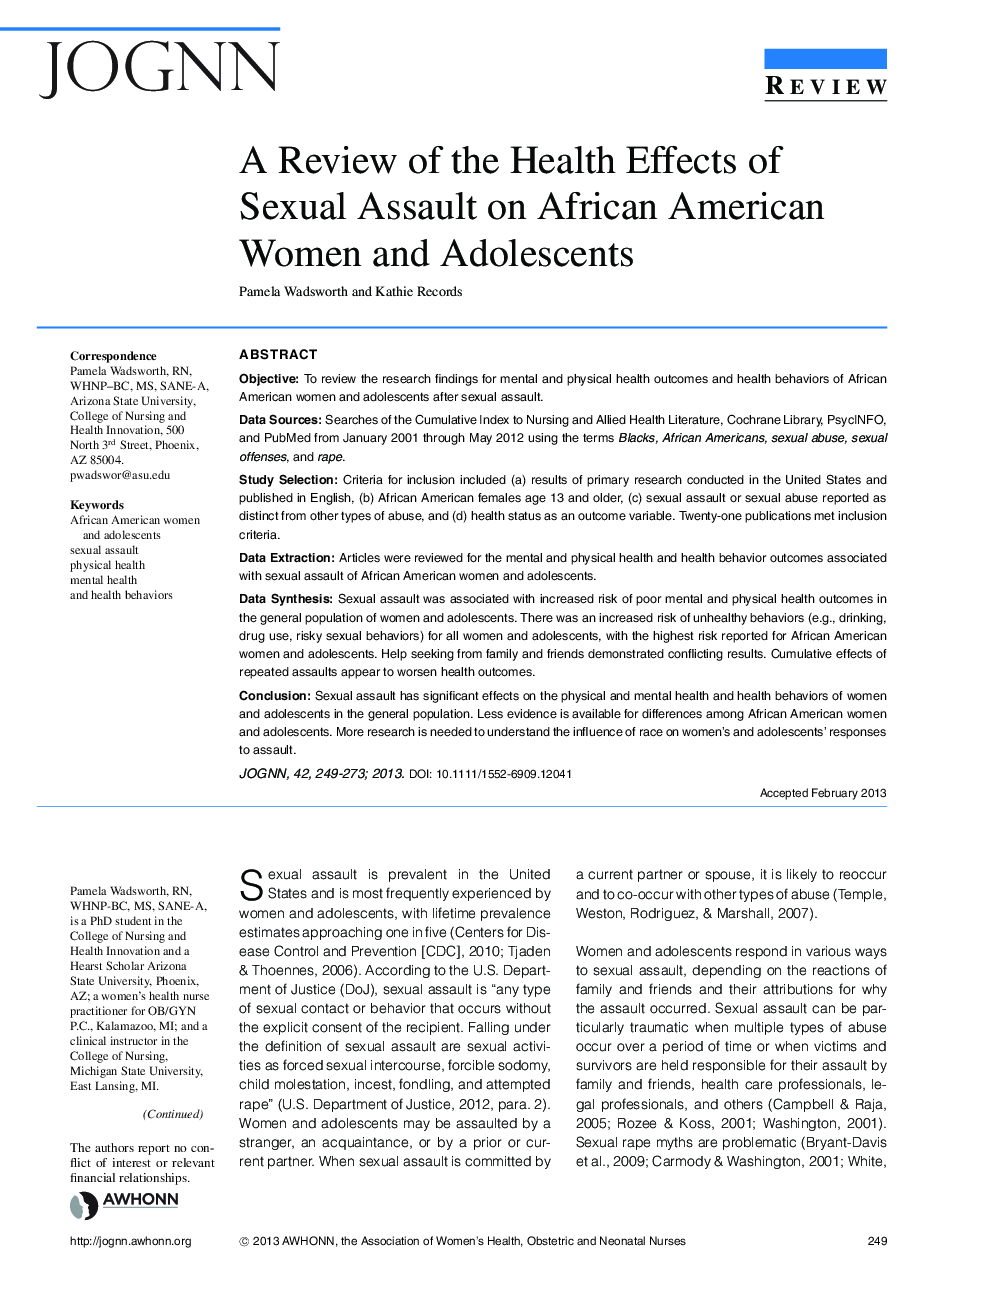 A Review of the Health Effects of Sexual Assault on African American Women and Adolescents